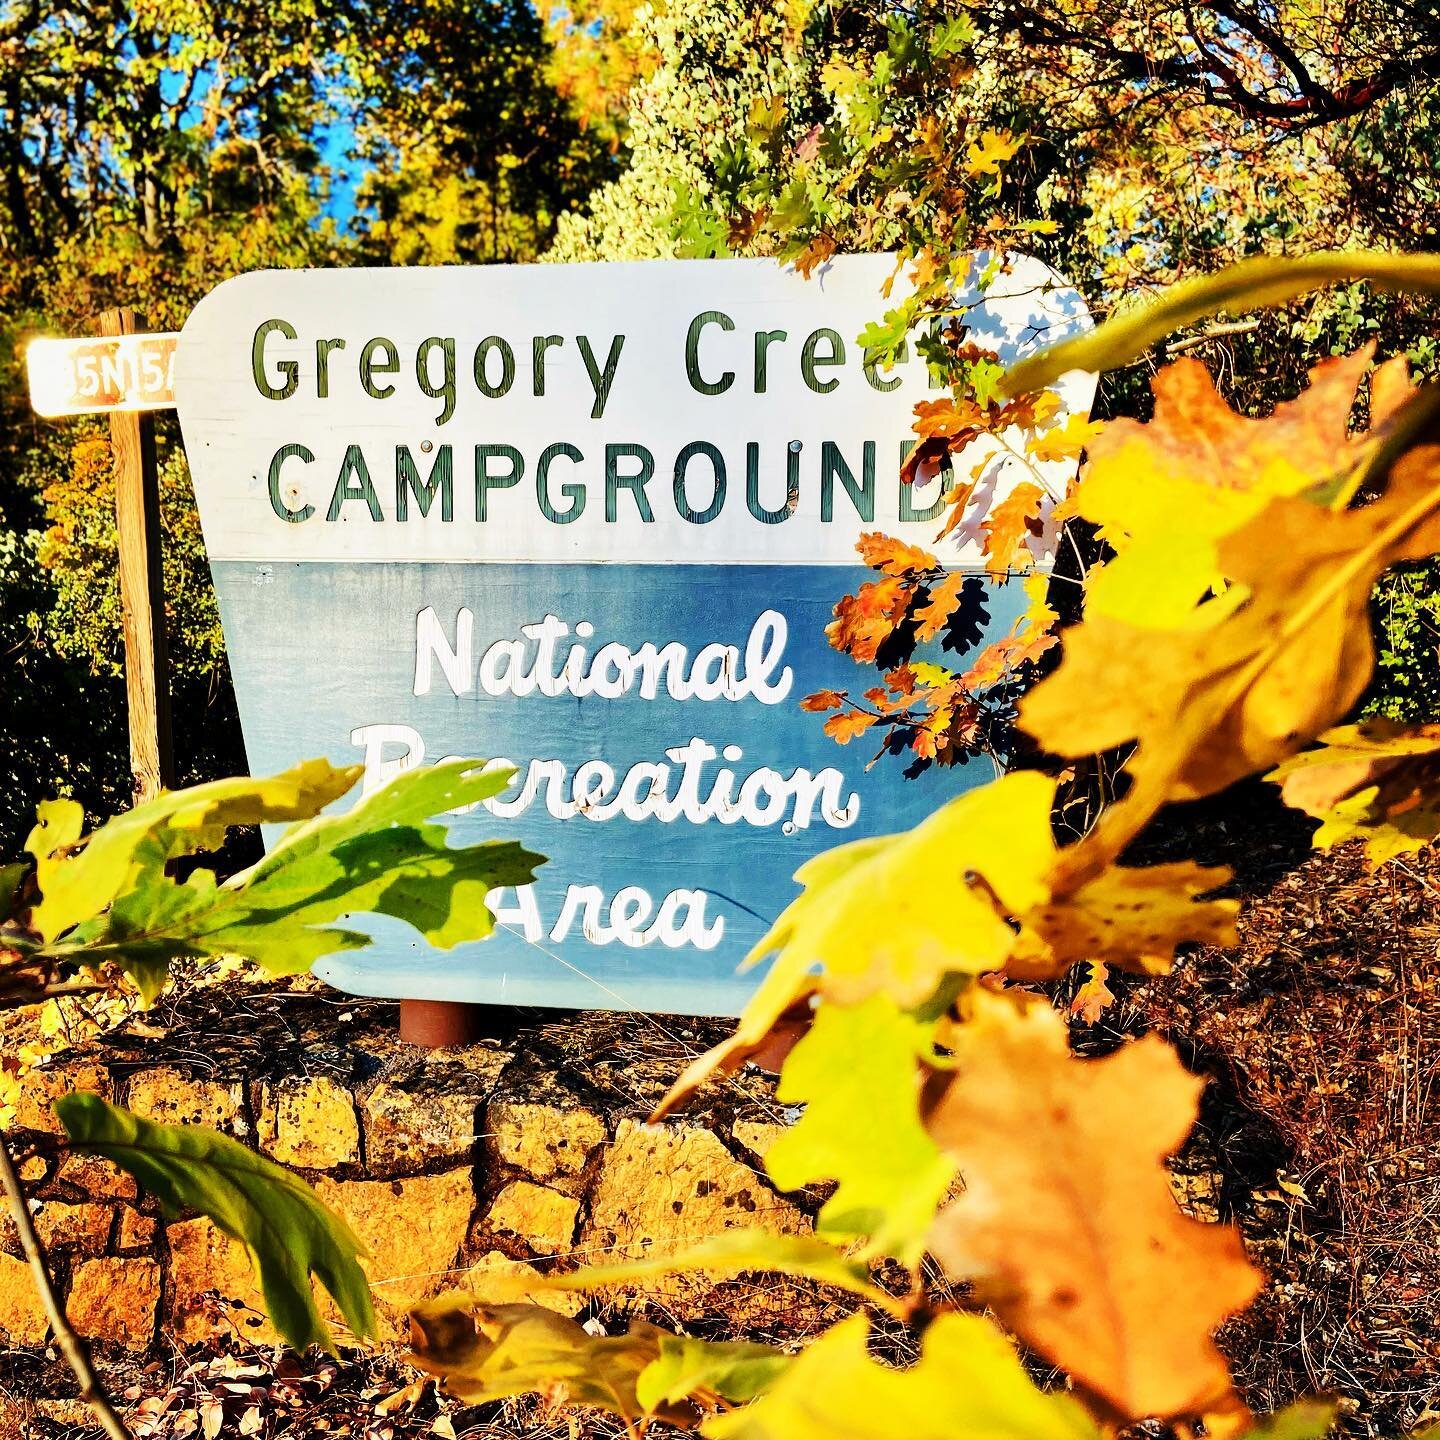 Who&rsquo;s looking forward to 2021? 

Gregory Creek Group Campground in fall colors. 

#camping #fall #colors #gregorycreek #shastalake #family #fun #smores #swimming #summer #destination #vacation #2021 #newyear